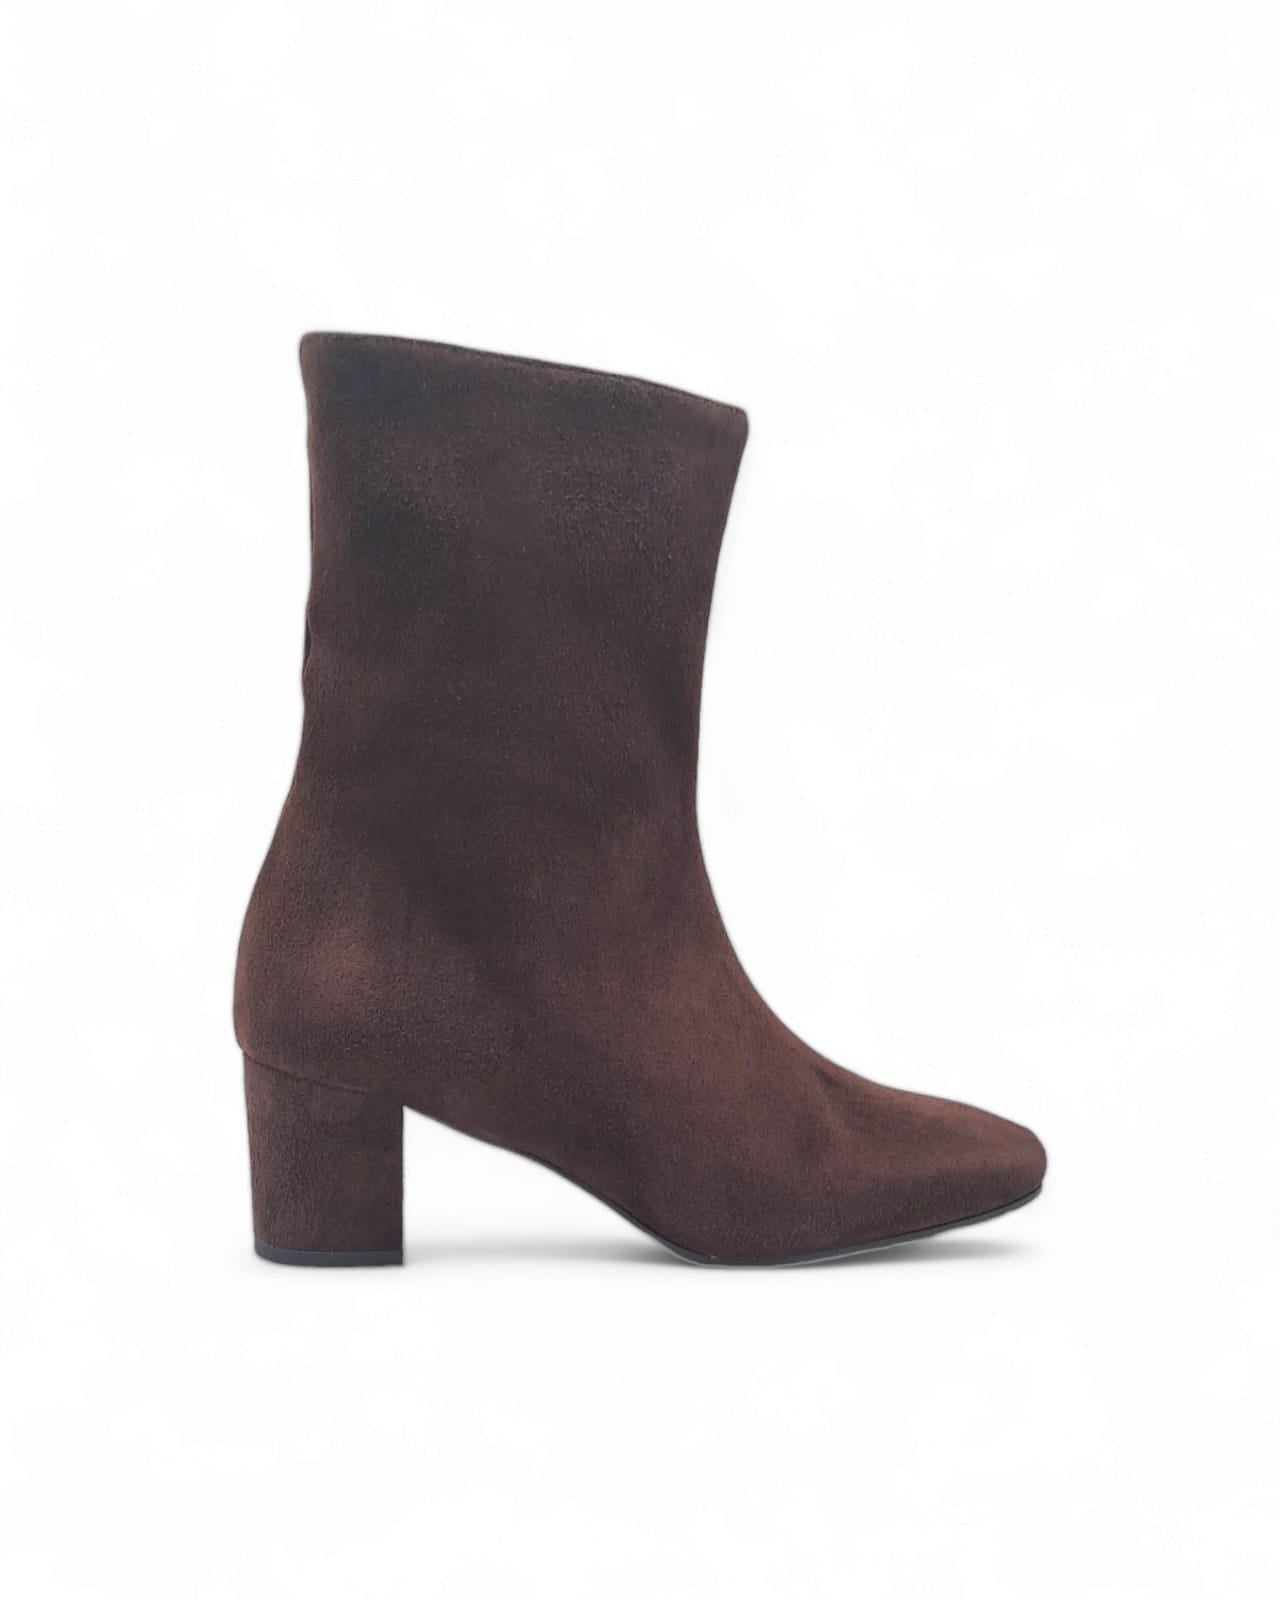 Silvana ankle boot in dark brown suede